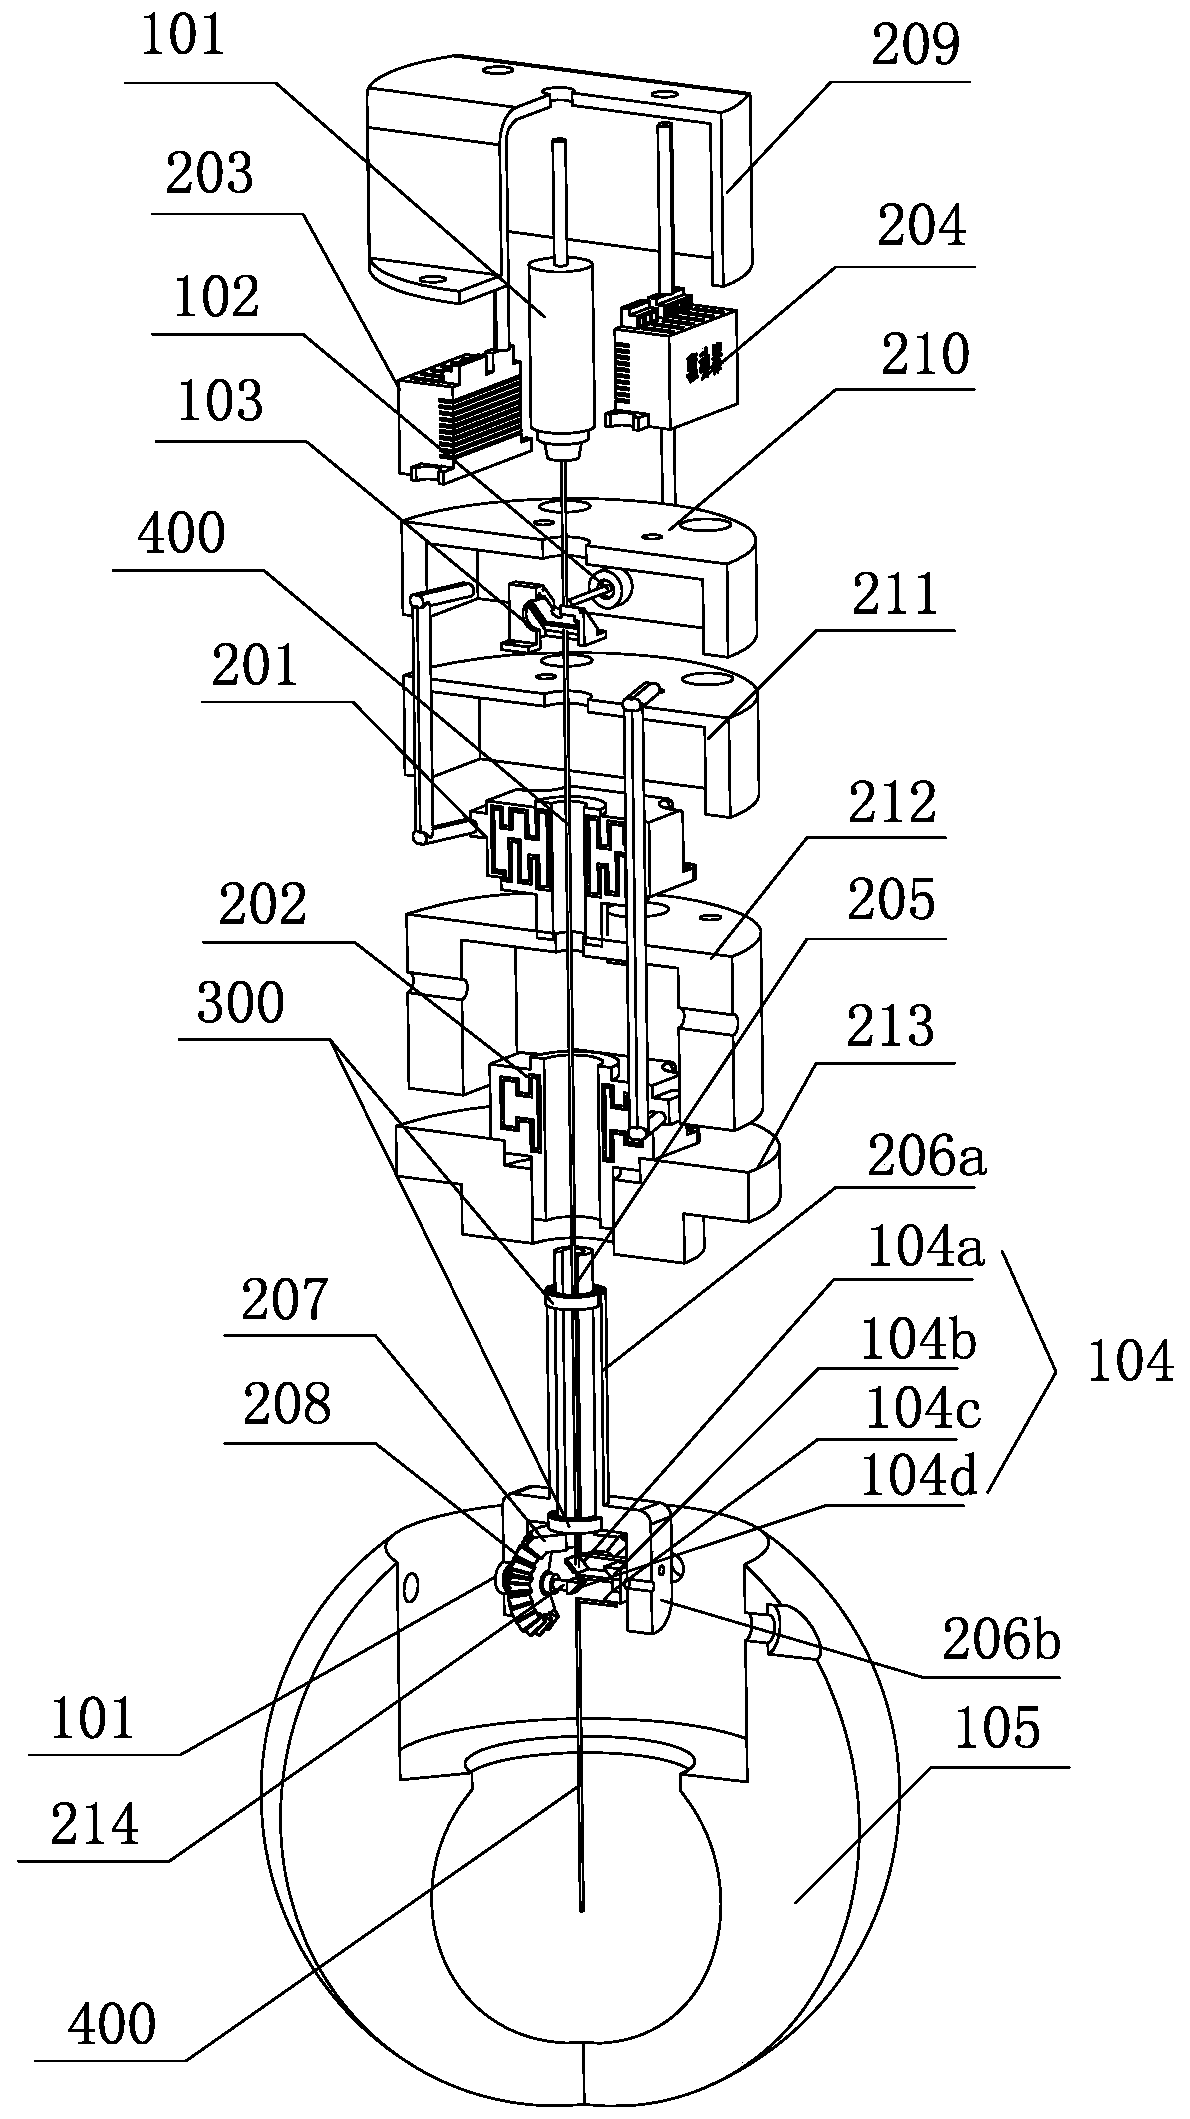 360-degree full-angle wide-area scanning head